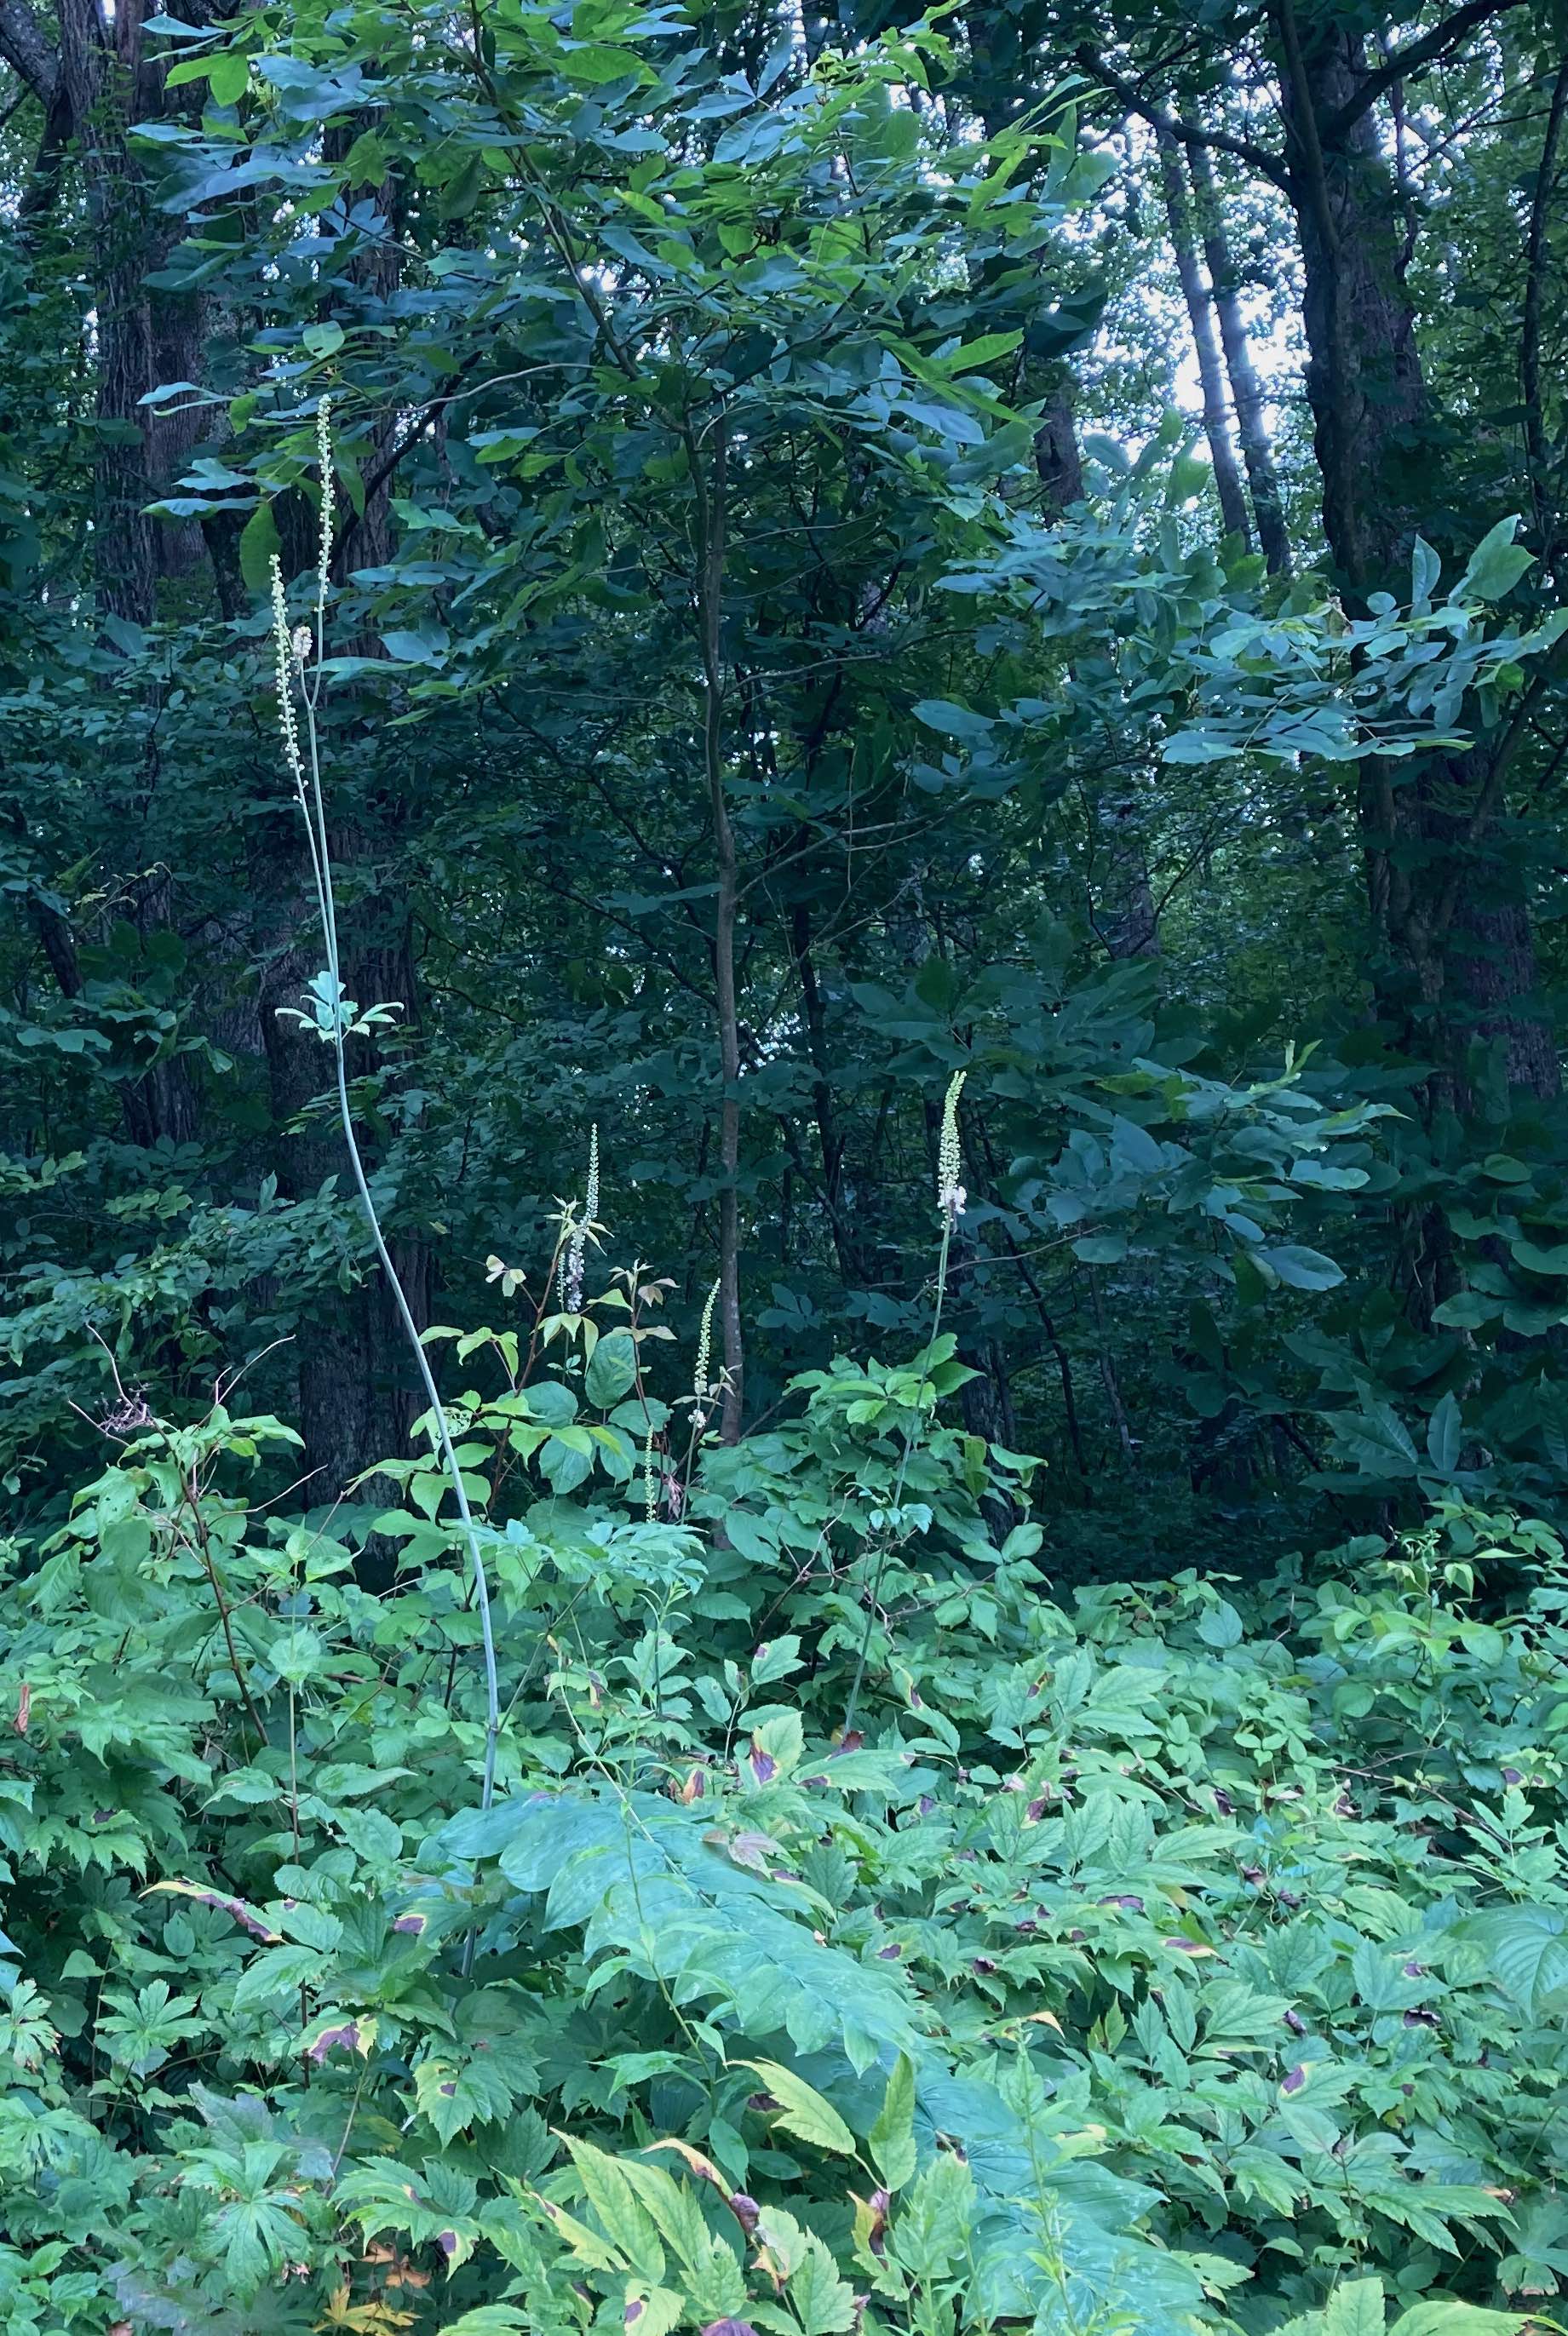 The Scientific Name is Actaea racemosa [= Cimicifuga racemosa]. You will likely hear them called Common Black Cohosh, Early Black Cohosh. This picture shows the The narrow racemes of white flowers can reach amazing heights. of Actaea racemosa [= Cimicifuga racemosa]